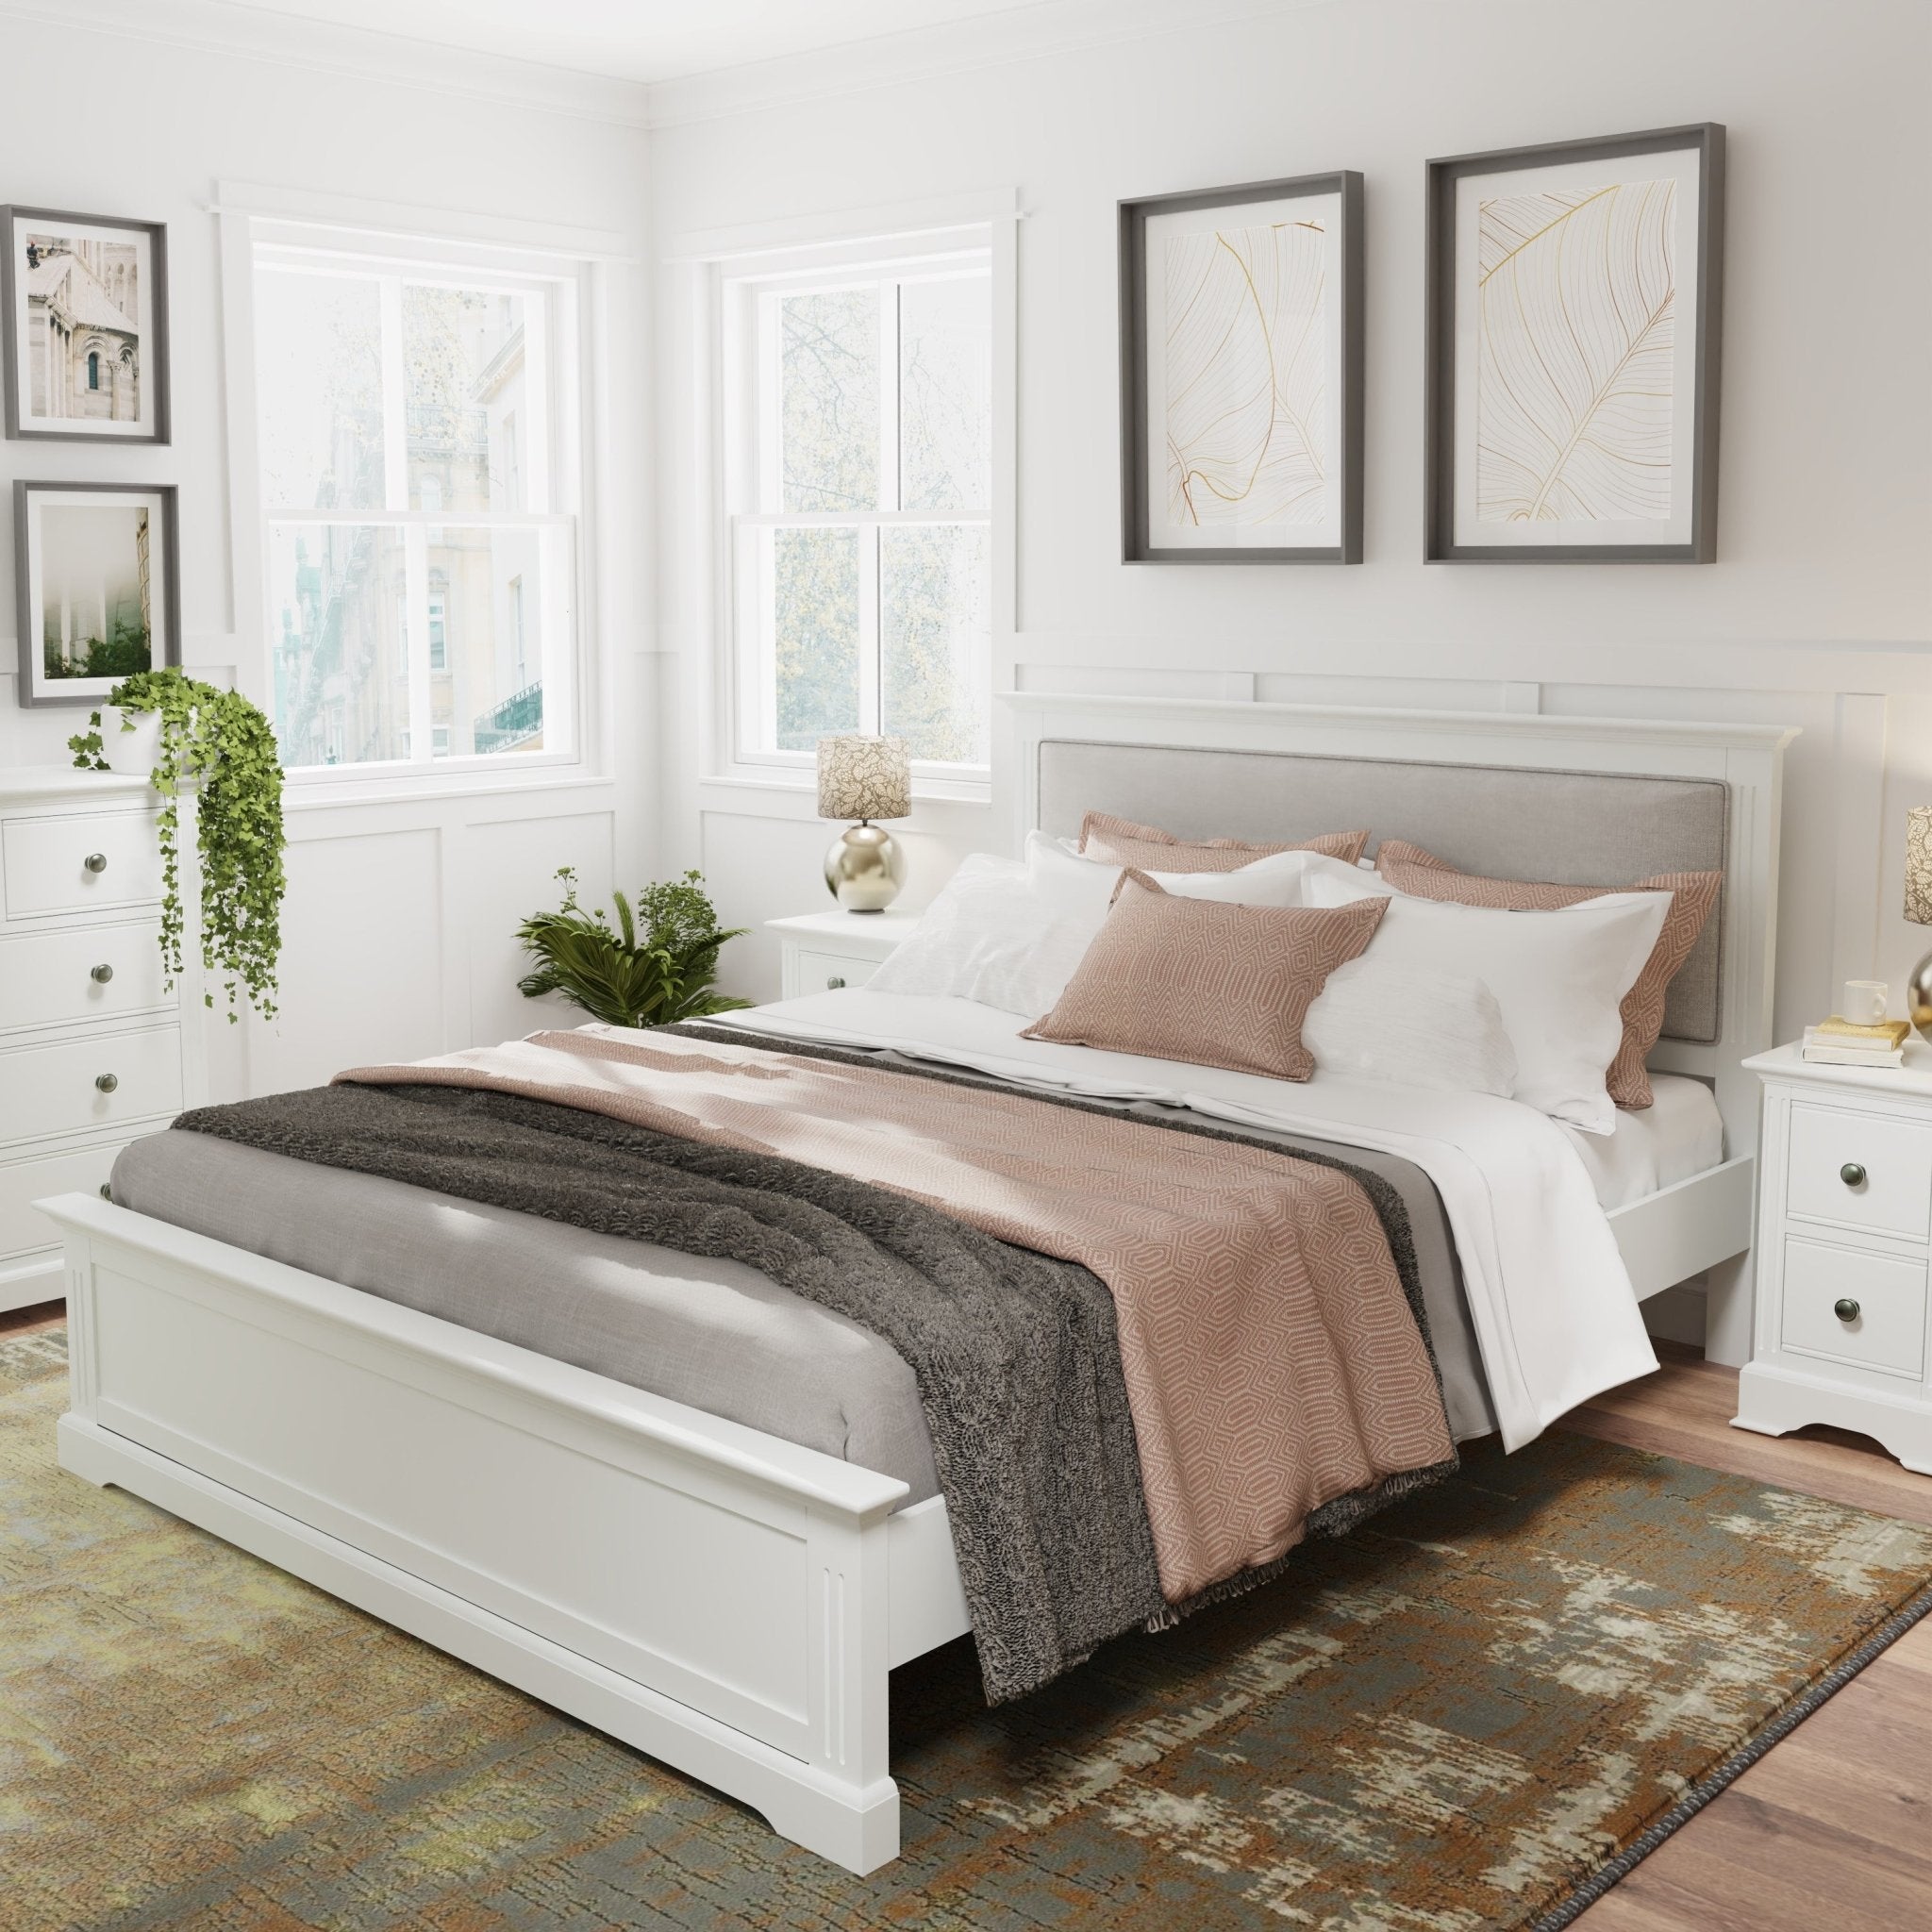 Snowdrop White Painted Kingsize Bed Frame - 5ft - Duck Barn Interiors